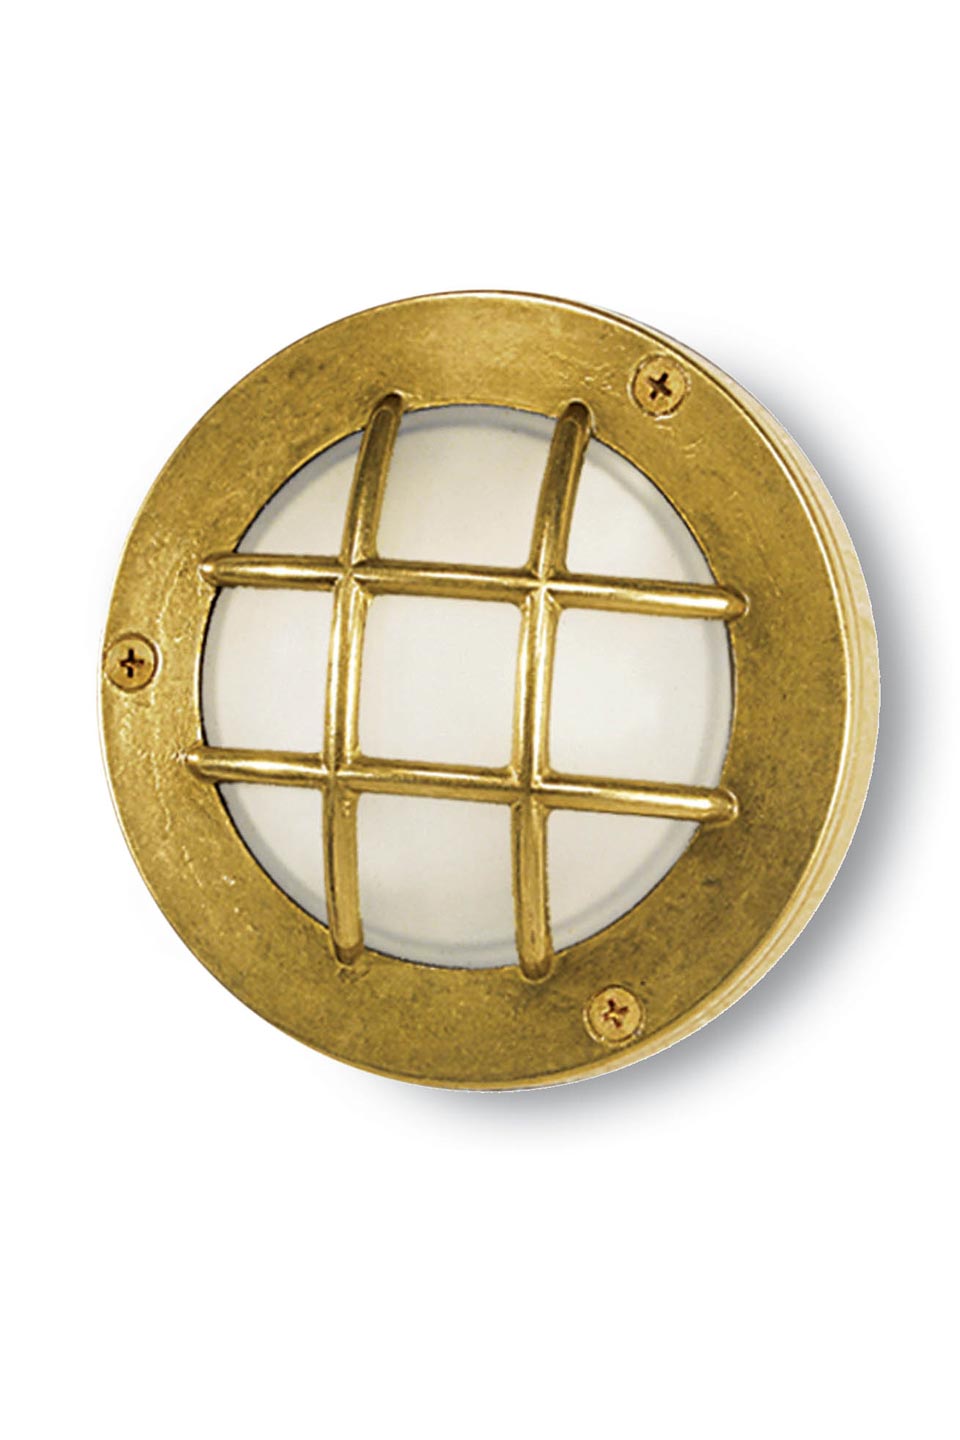 Cocci small gold outdoor wall lamp marine style. Moretti Luce. 